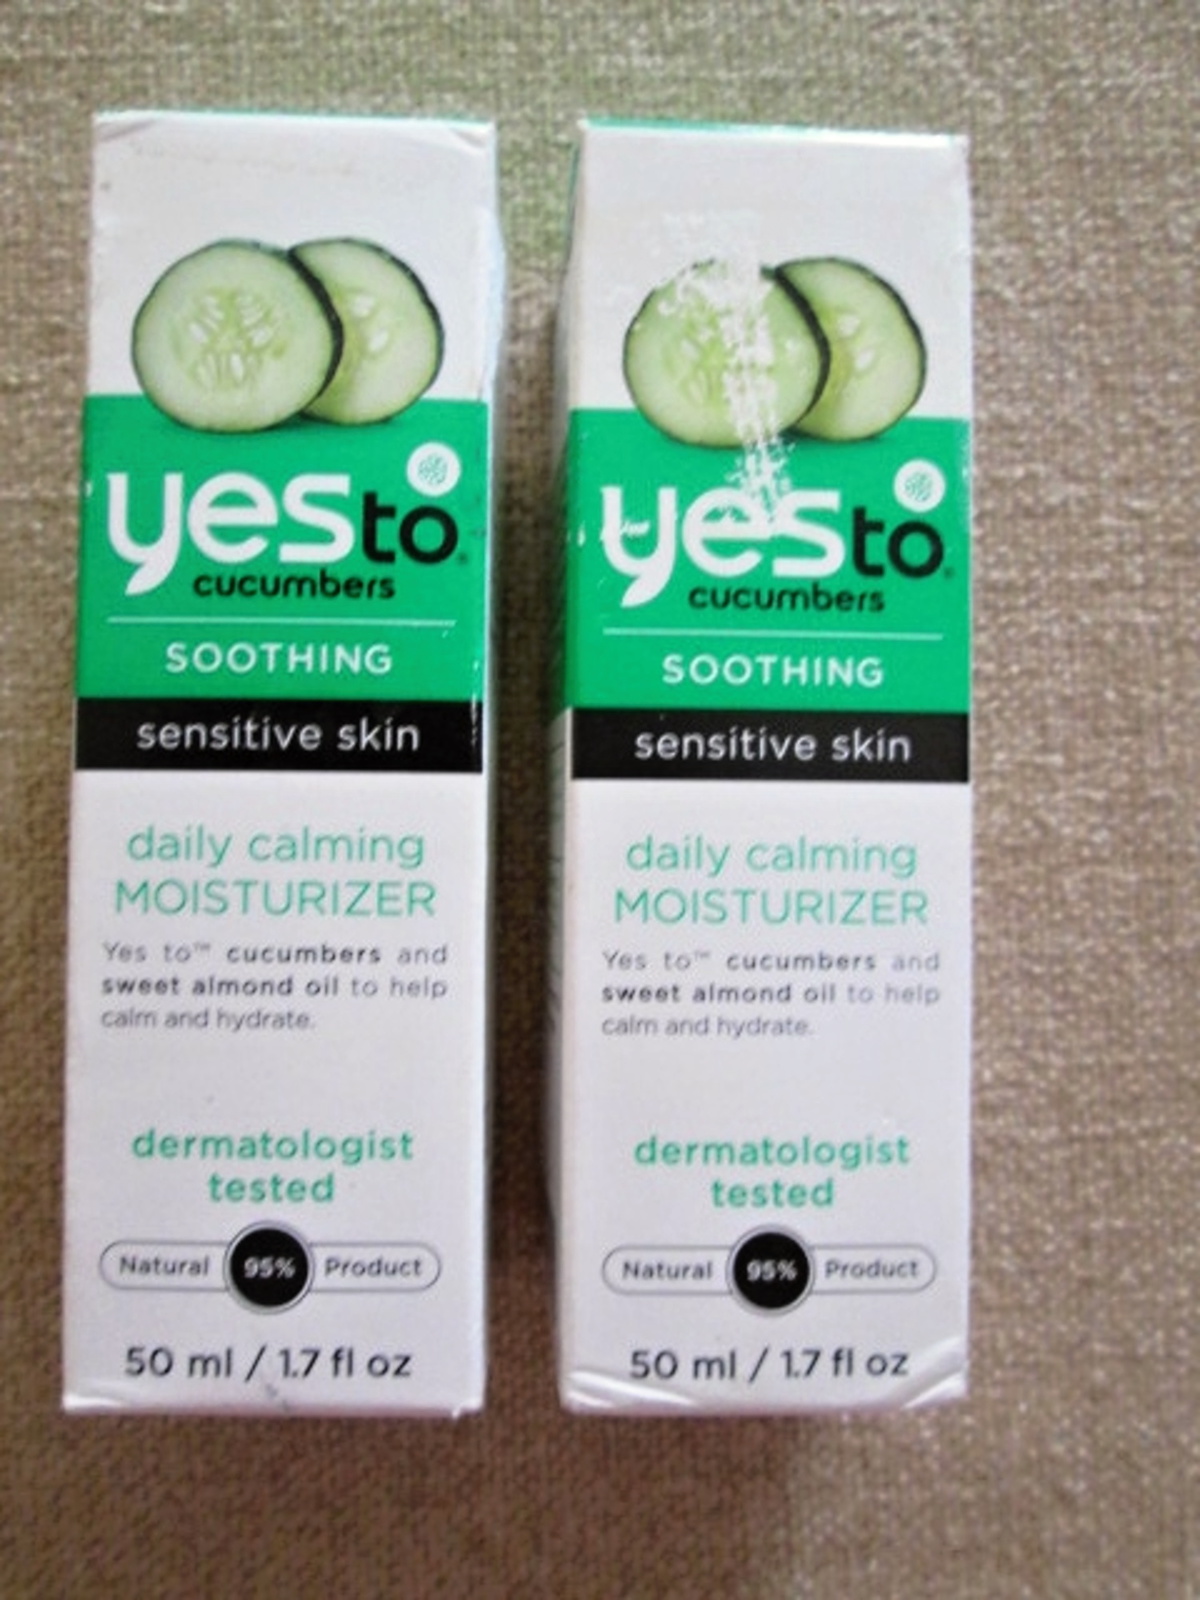 Lot of Two New Yes To Cucumbers Sensitive Skin Daily Moisturizer 1.7 FL OZ - $15.95